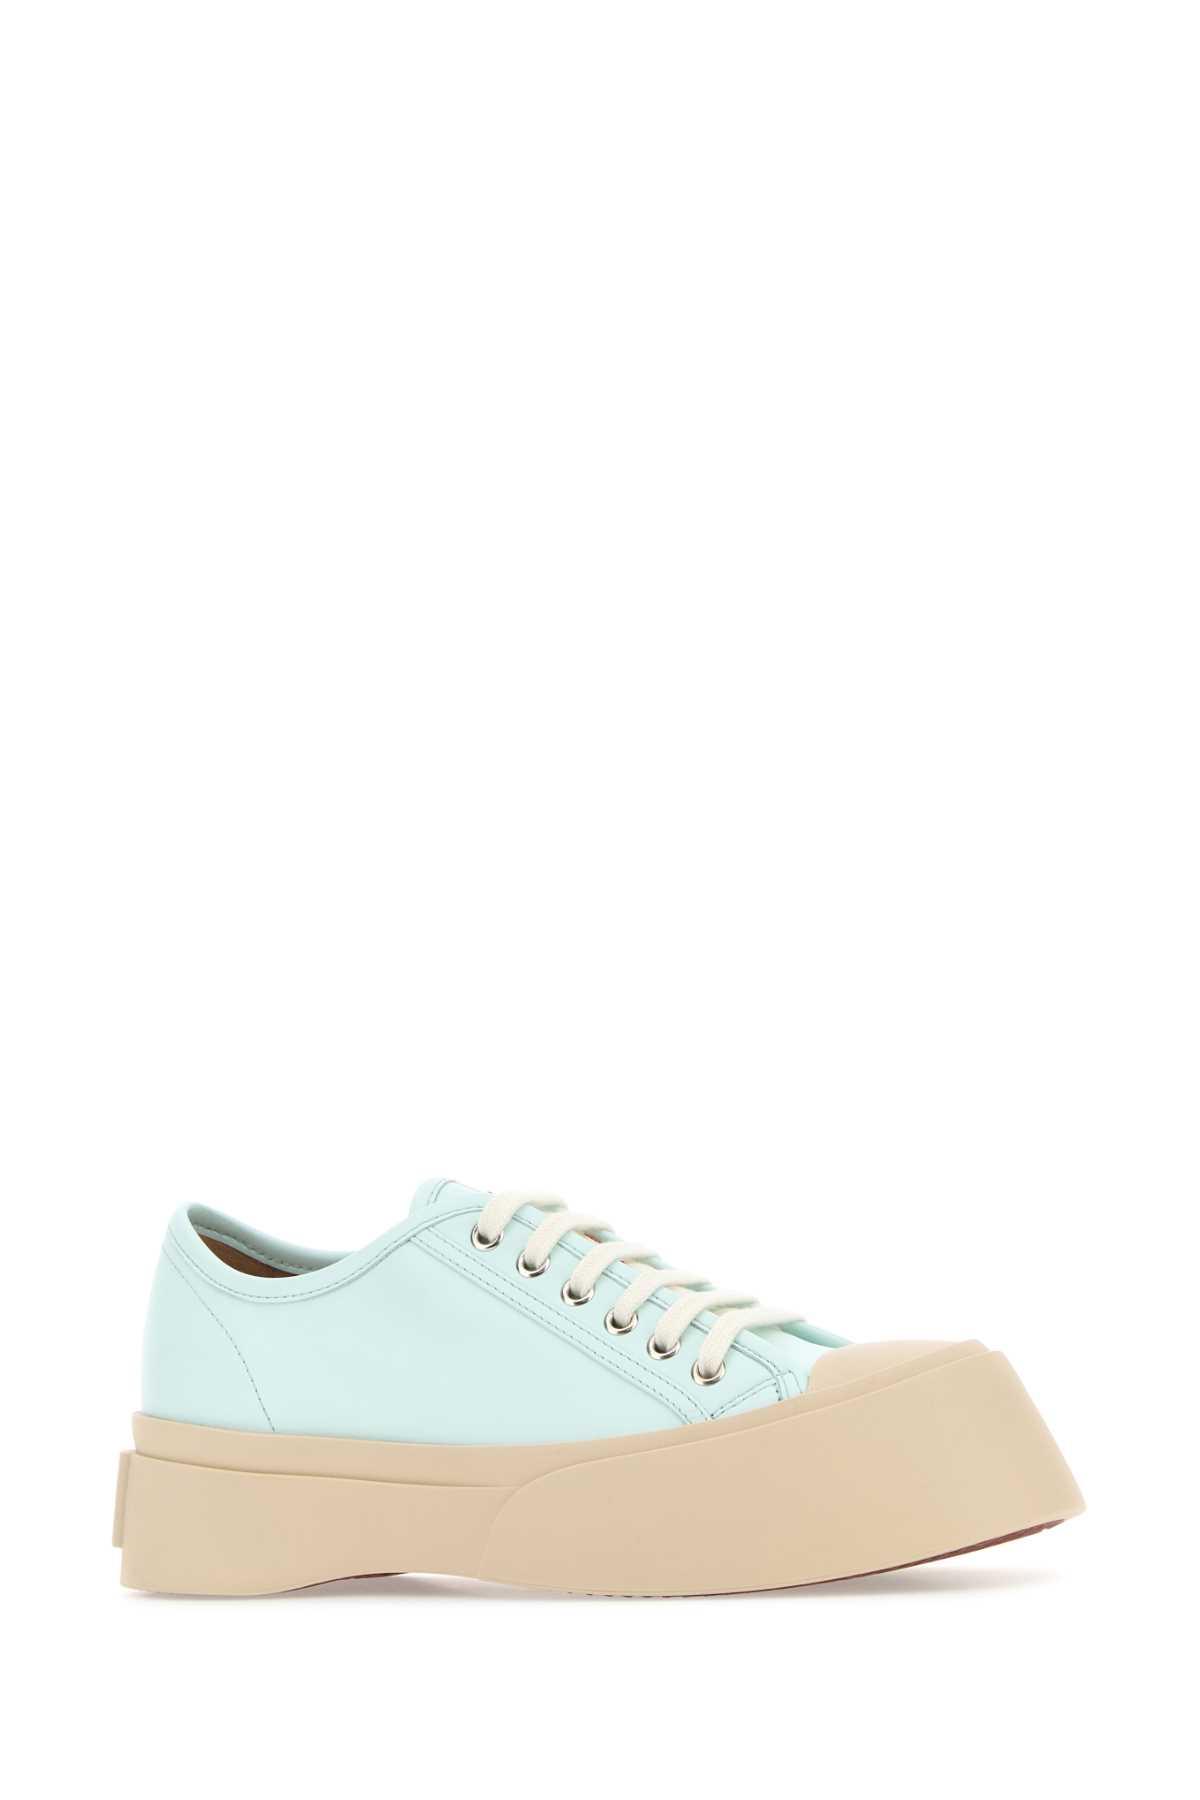 Shop Marni Light Blue Leather Pablo Sneakers In Mineralice